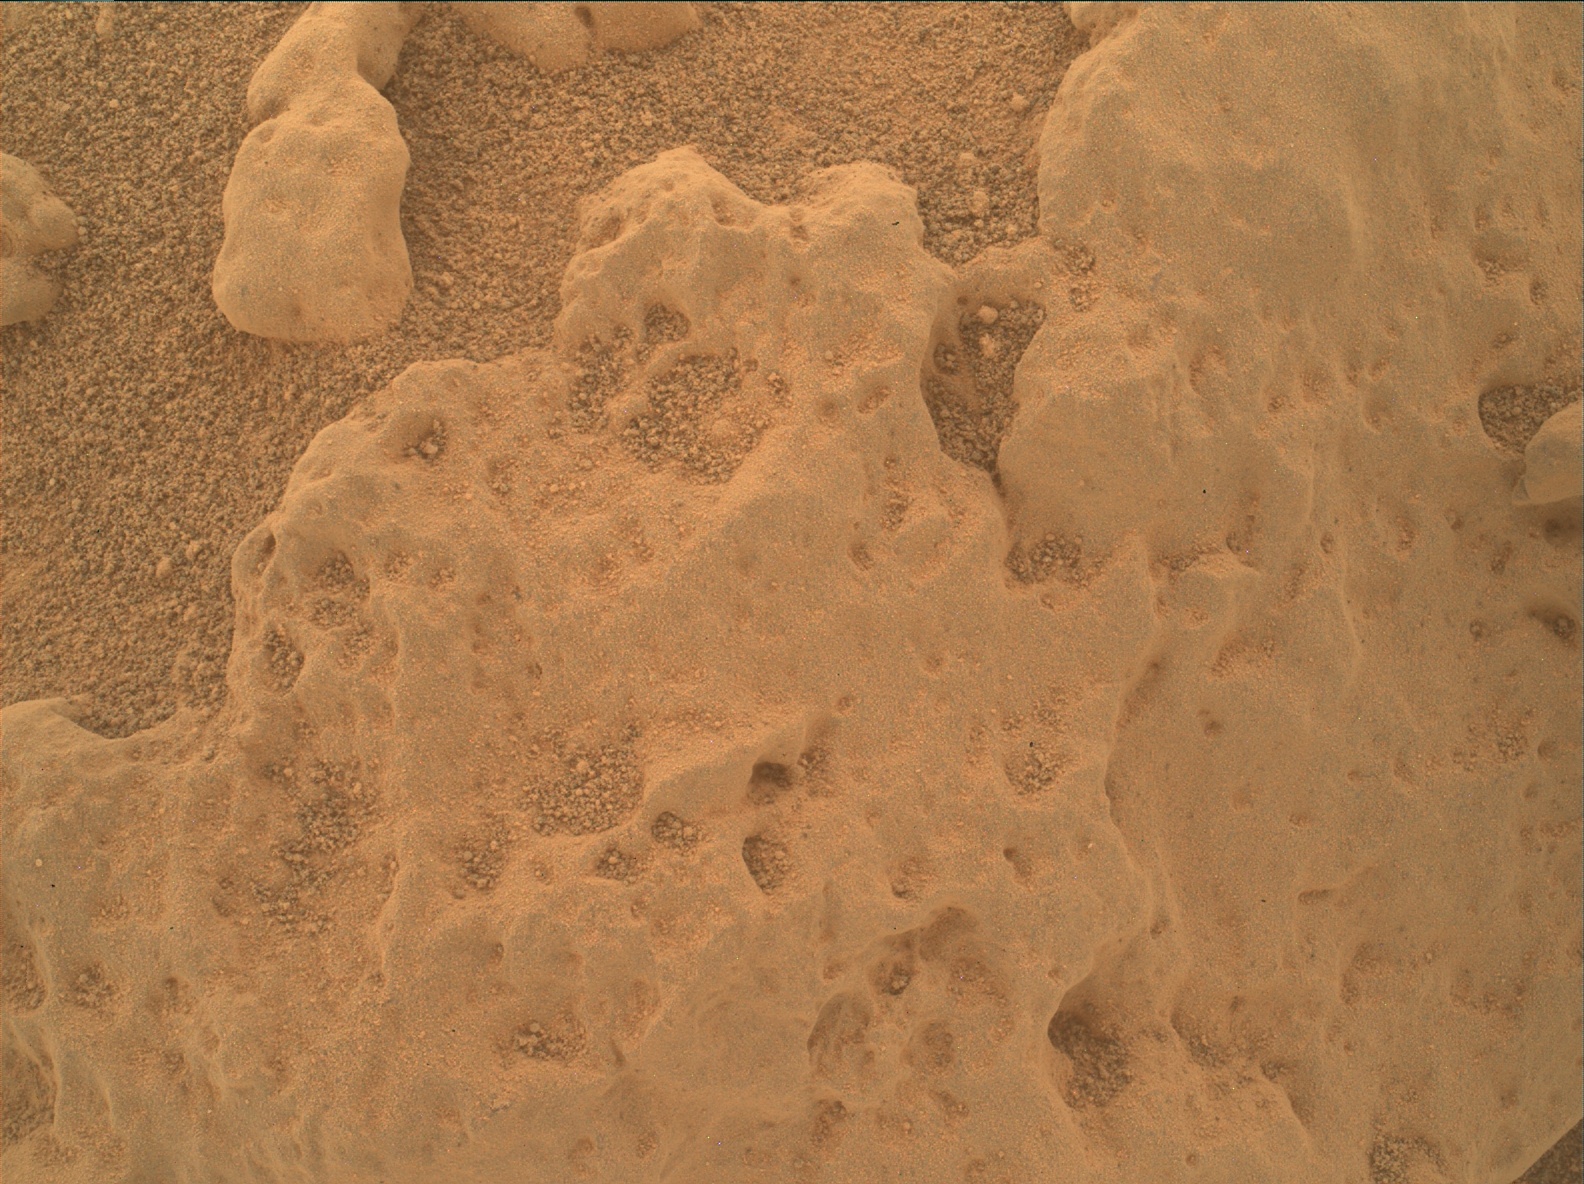 Nasa's Mars rover Curiosity acquired this image using its Mars Hand Lens Imager (MAHLI) on Sol 3728